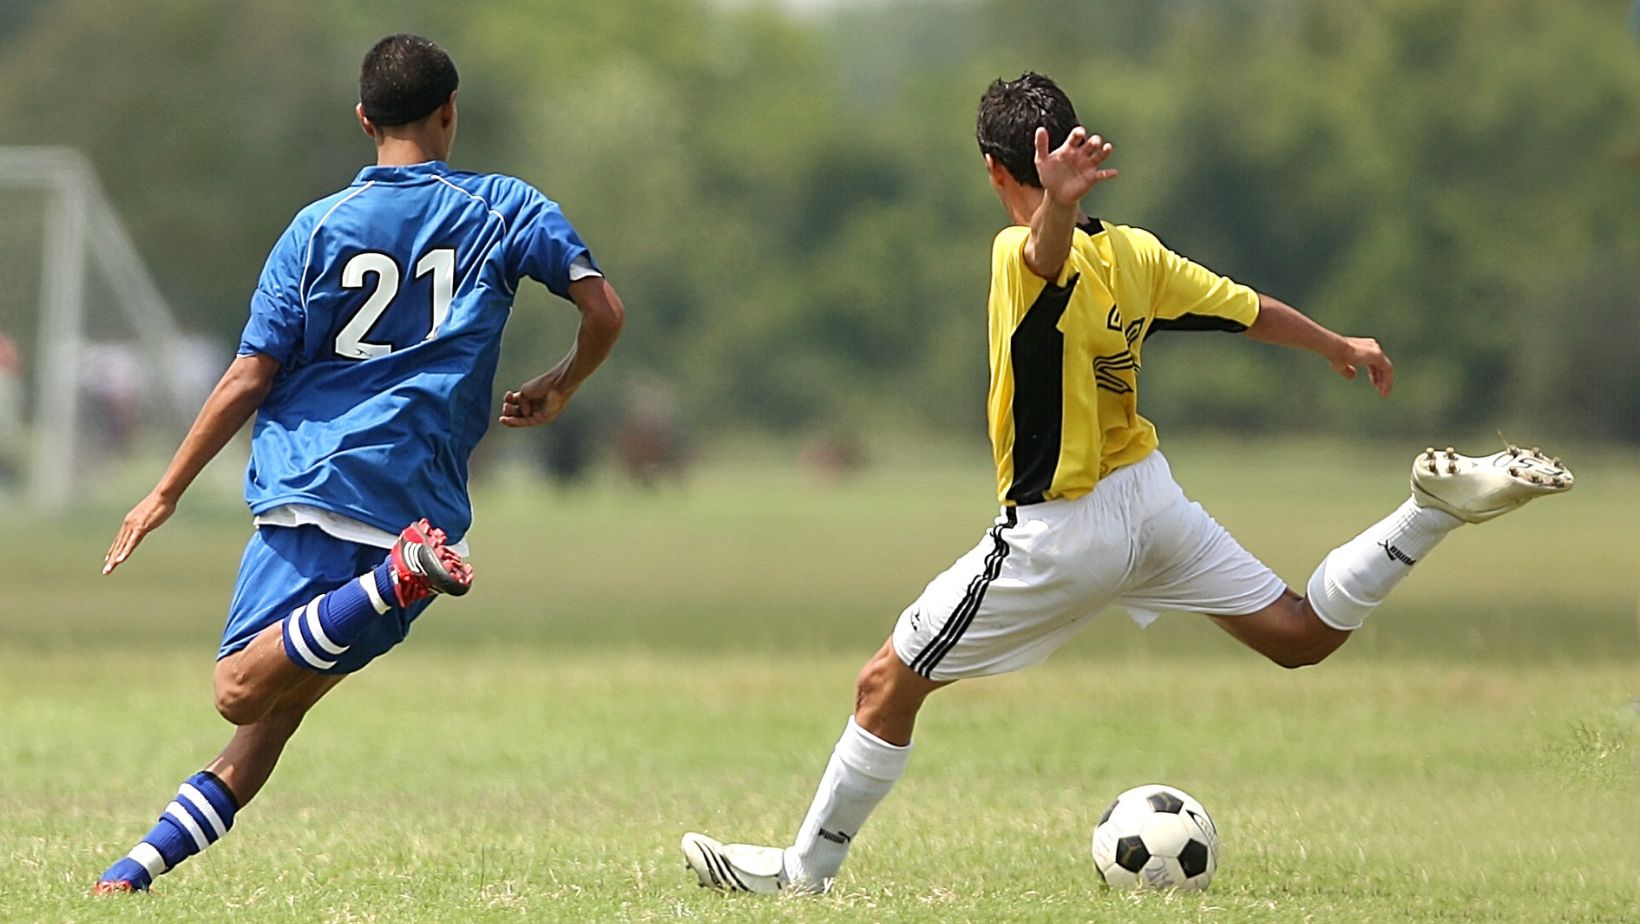 Read more about the article What is the Level of Competition in the Highest Youth Soccer League